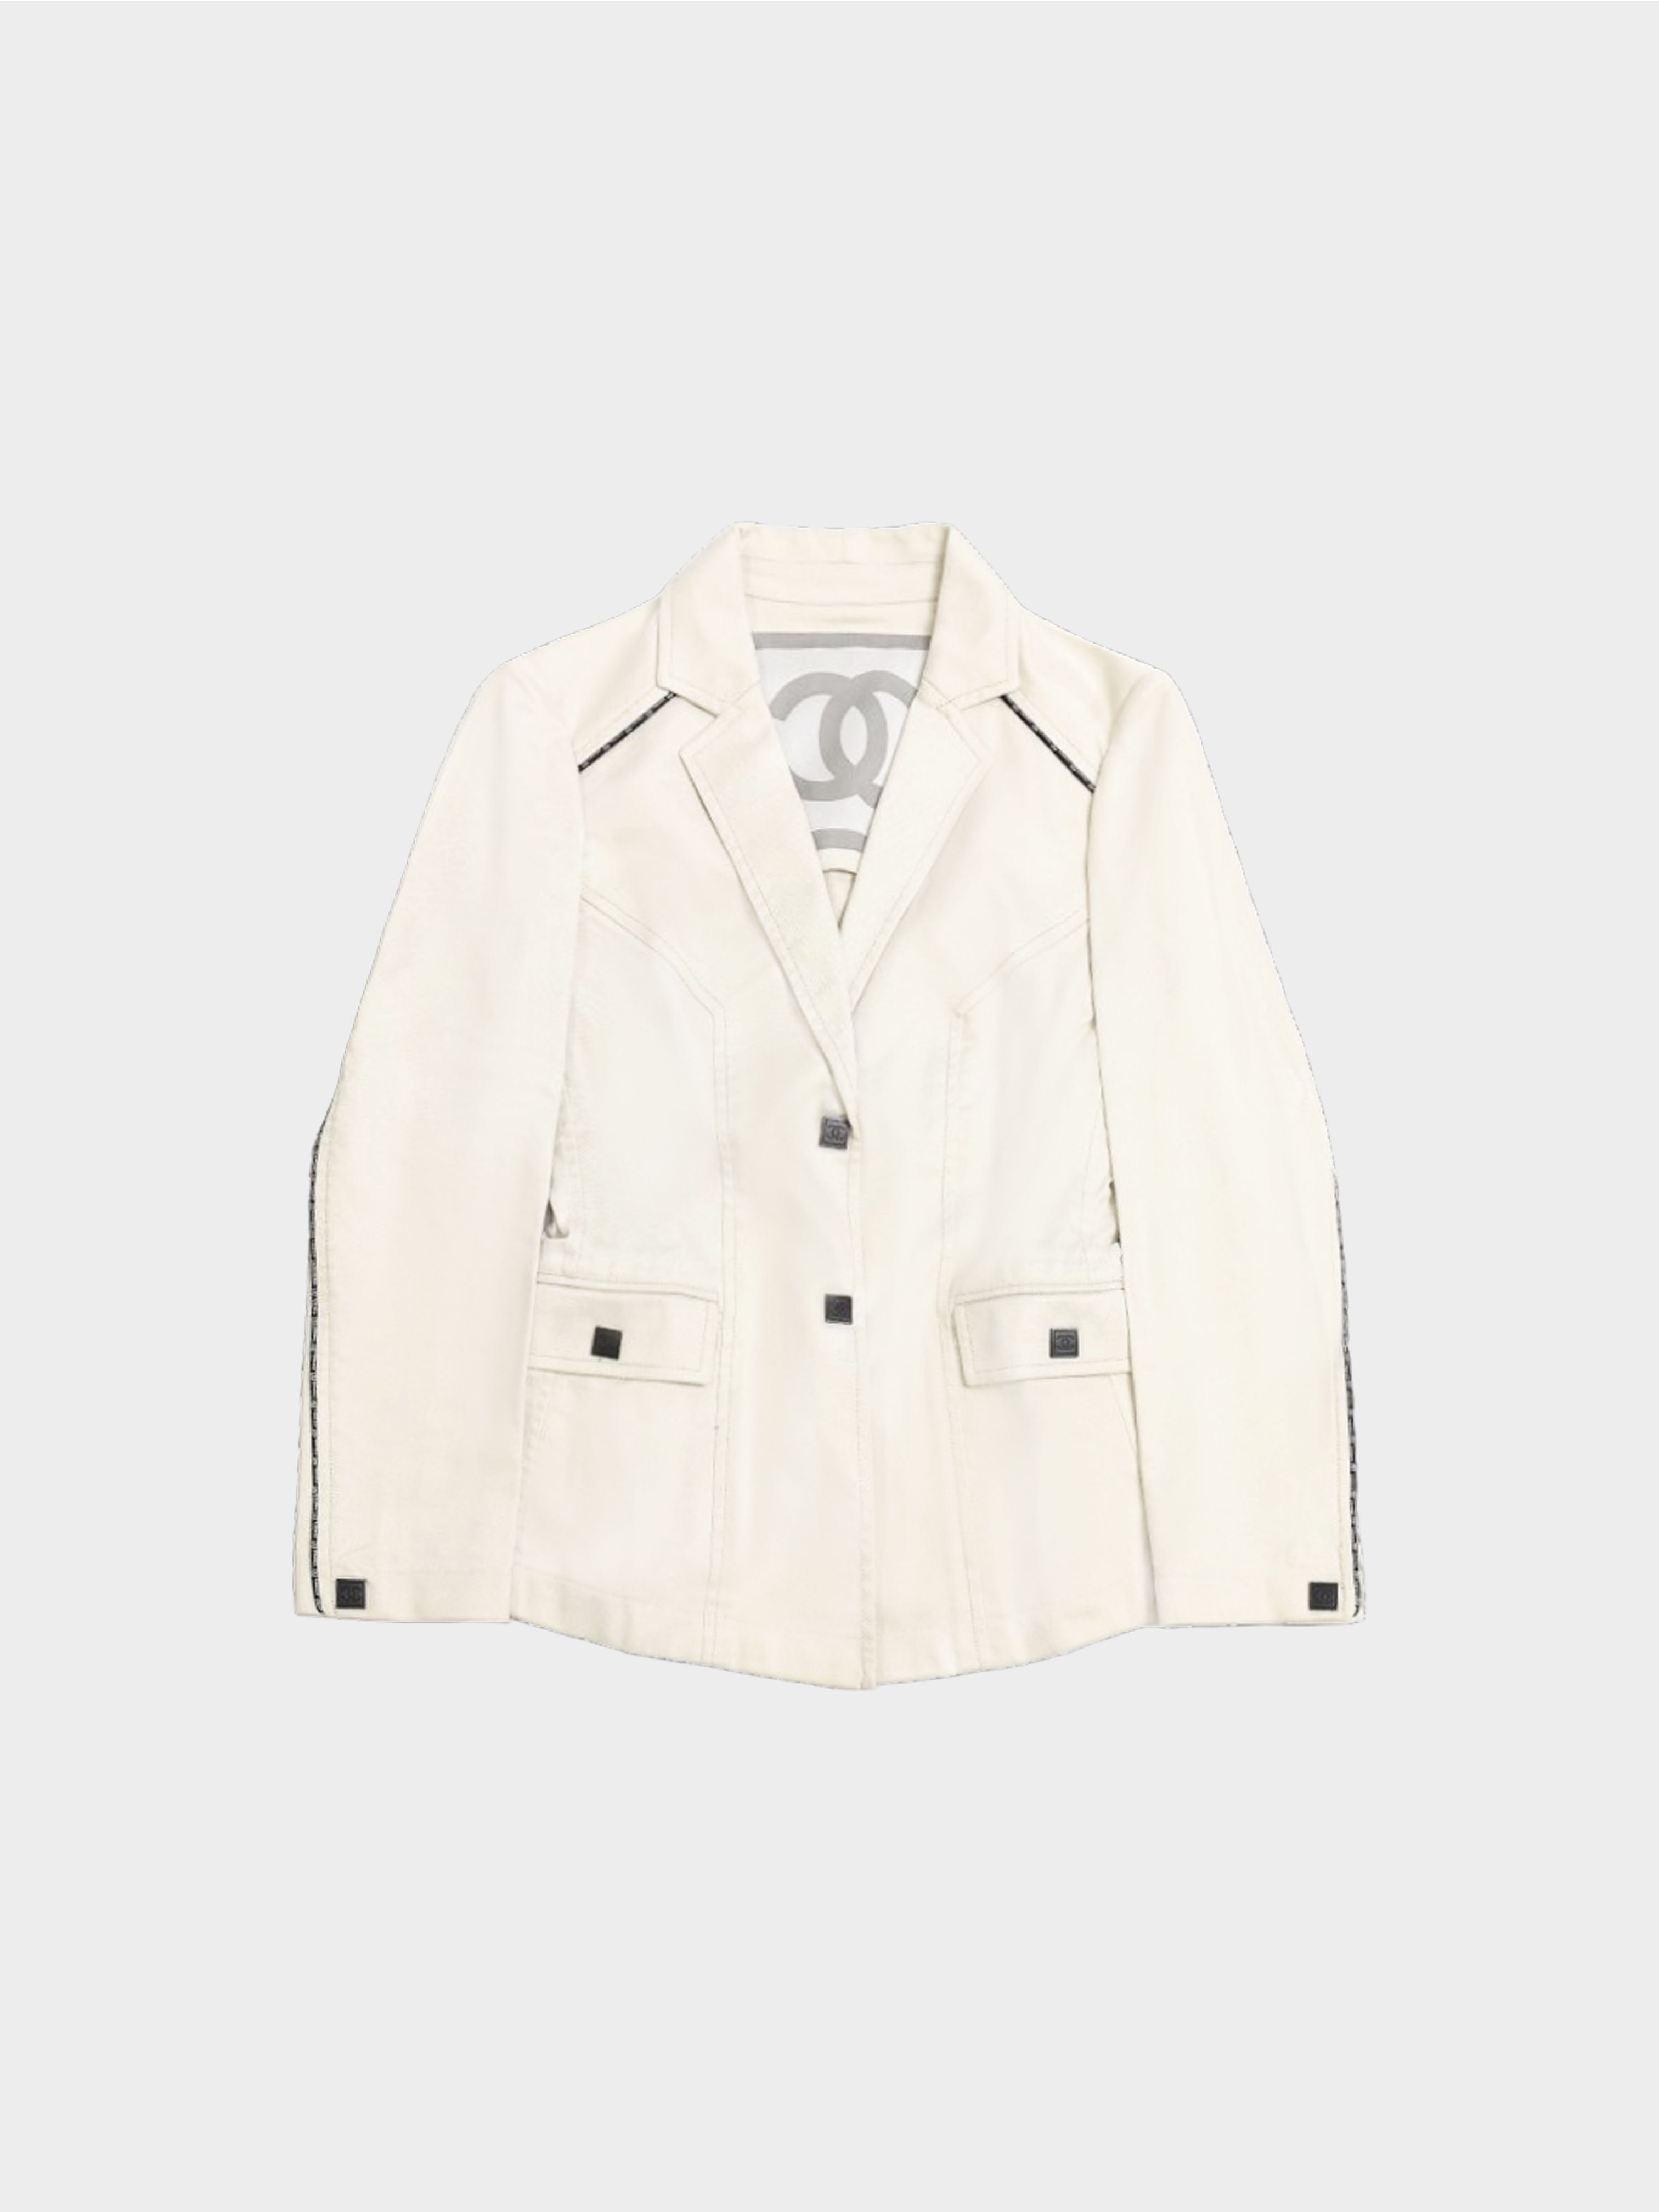 Chanel SS 2004 Off White Single Breasted Jacket